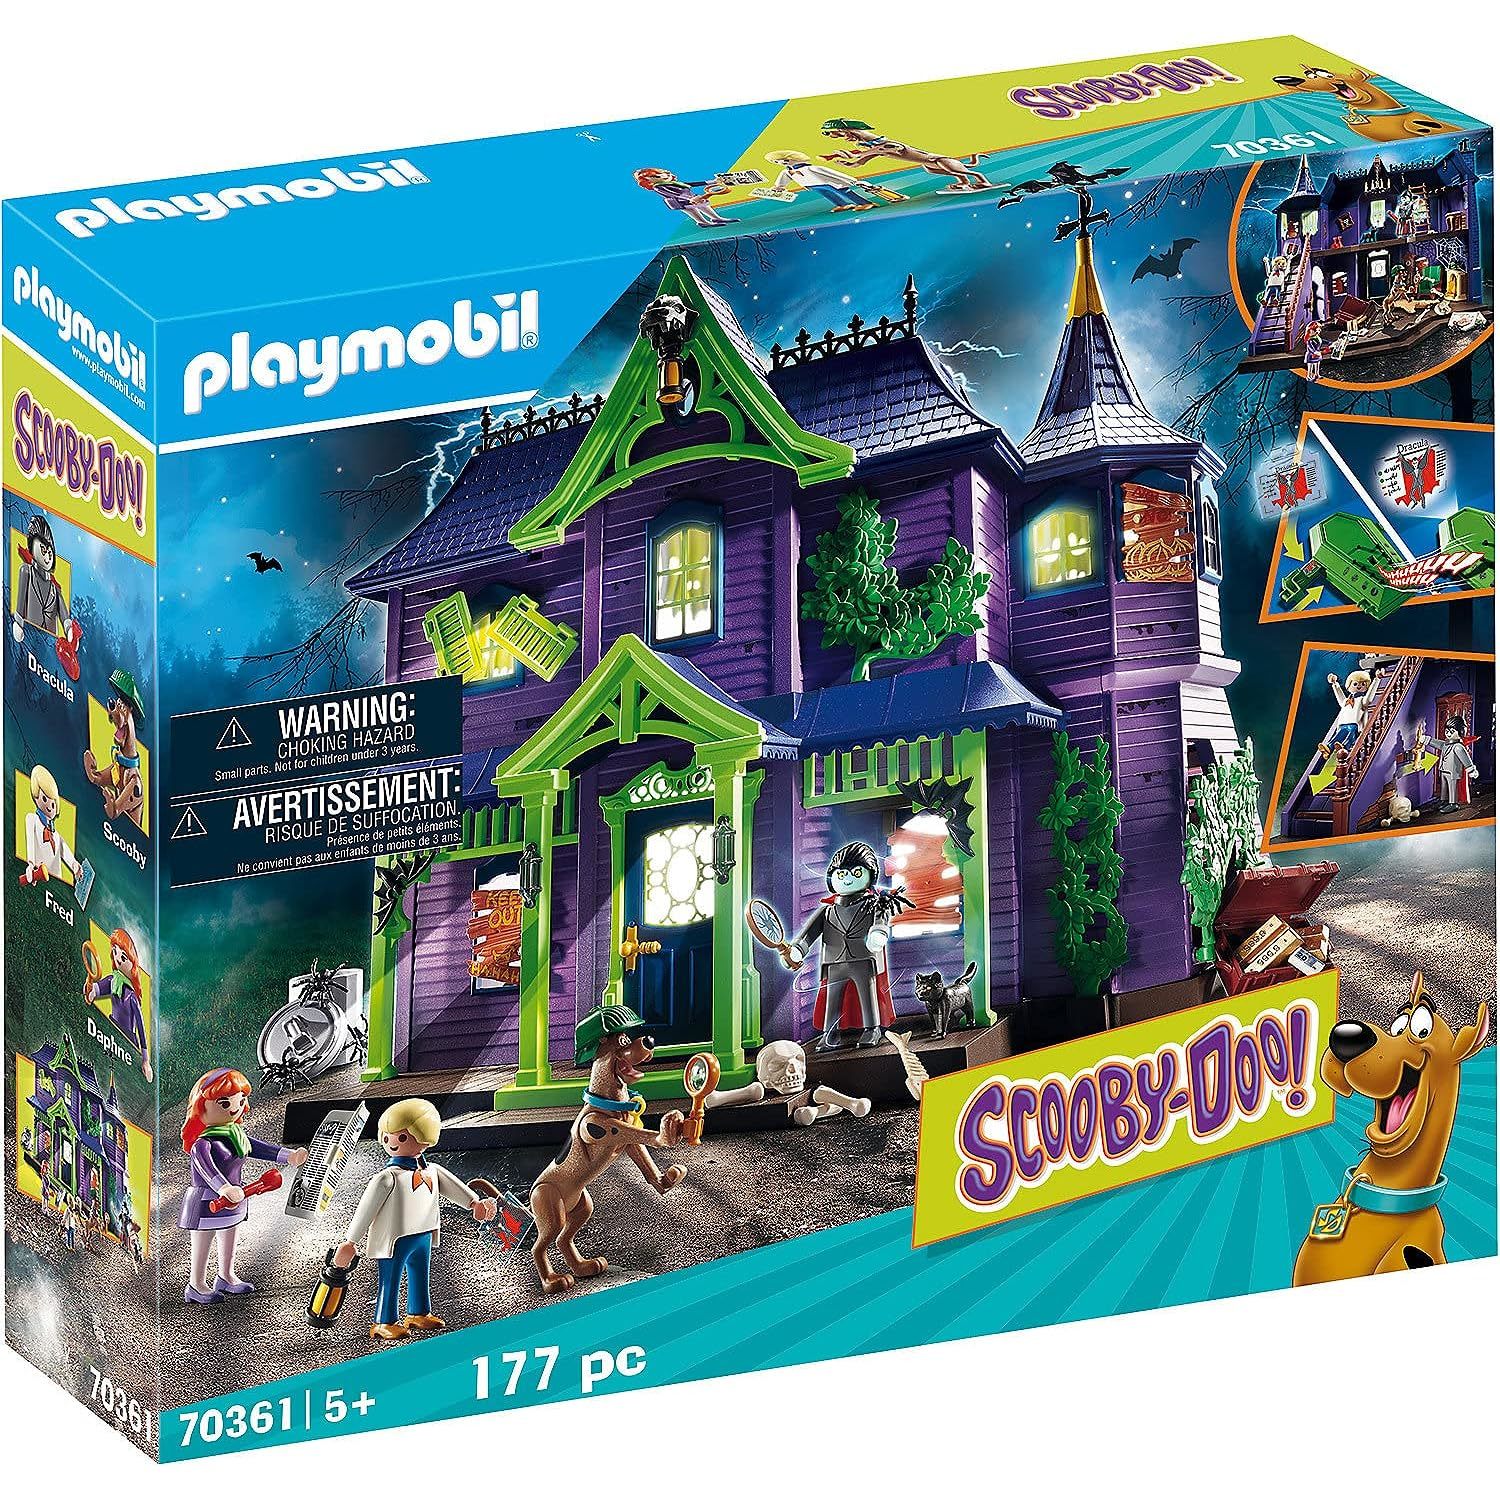 Playmobil Scooby-DOO! Adventure in The Mystery Mansion Playset - $159.59